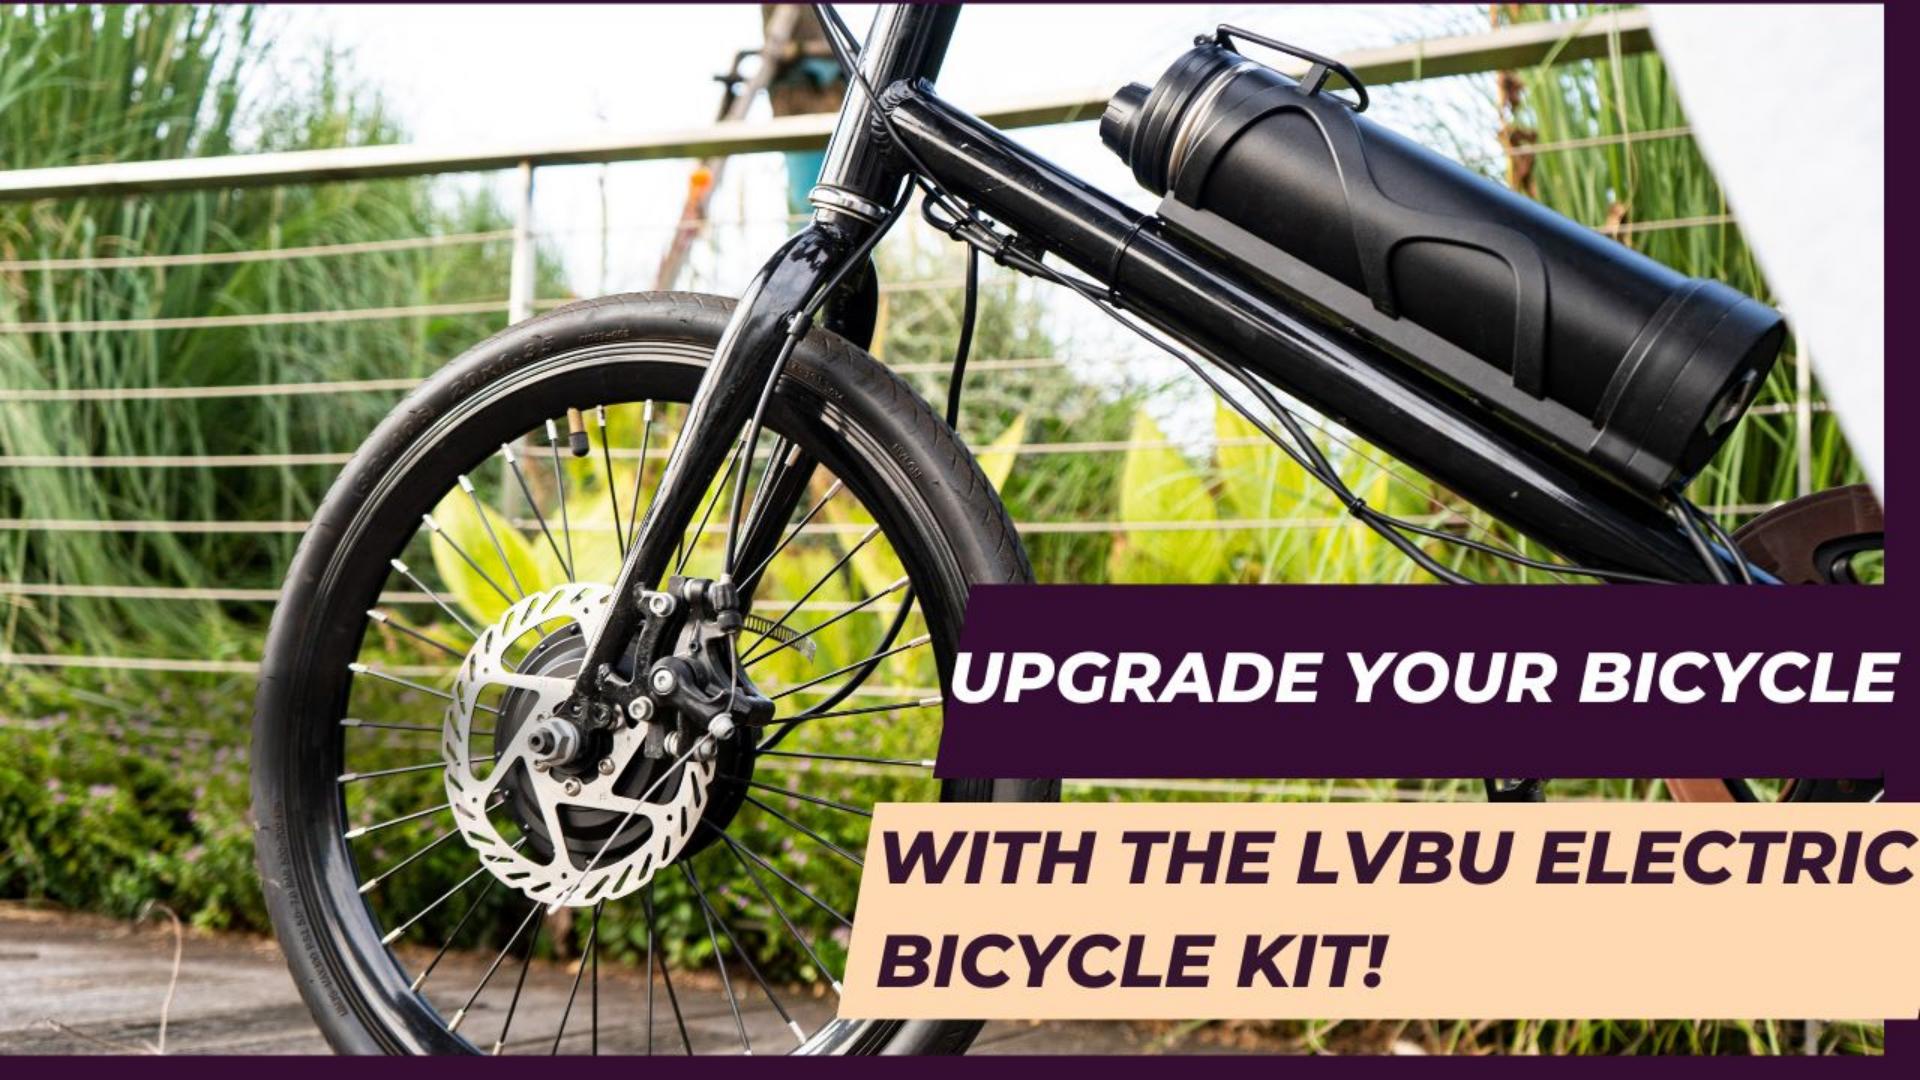 KF Bottle battery ebike kit./Upgrade Your Bicycle with the LVBU electric bicycle Kit!